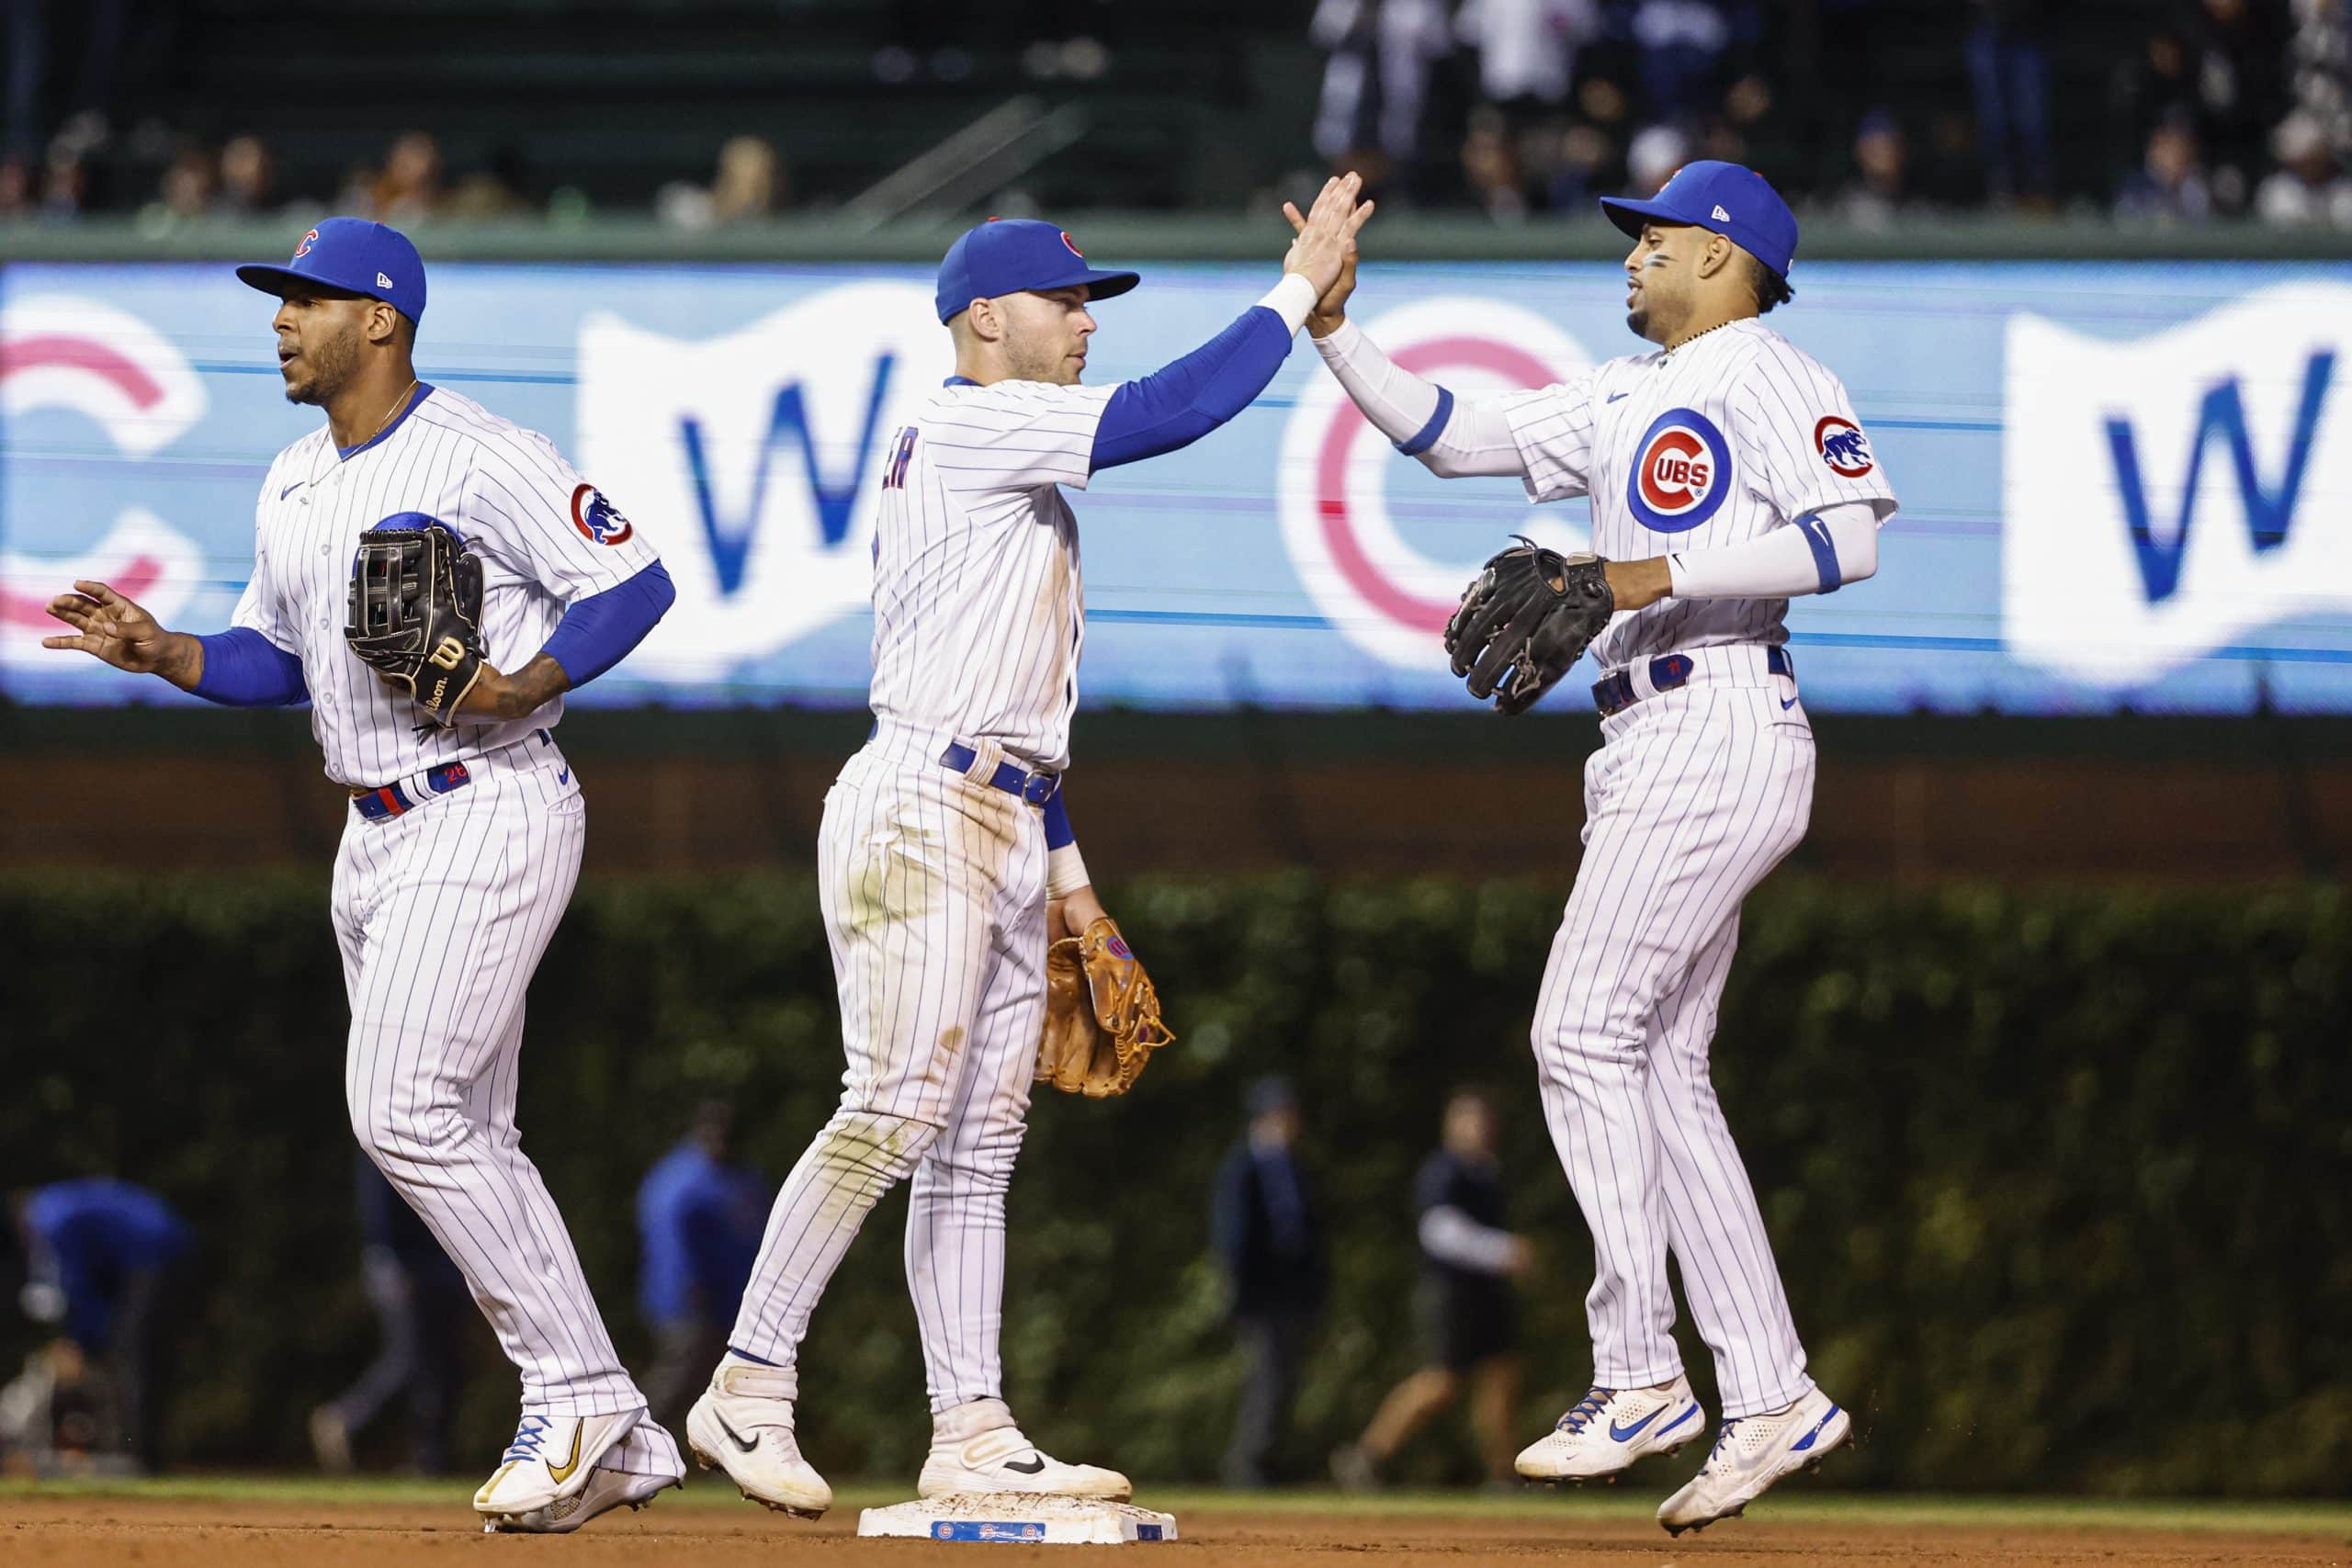 2023 Division Champion Sleeper Pick: Chicago Cubs To Win NL Central